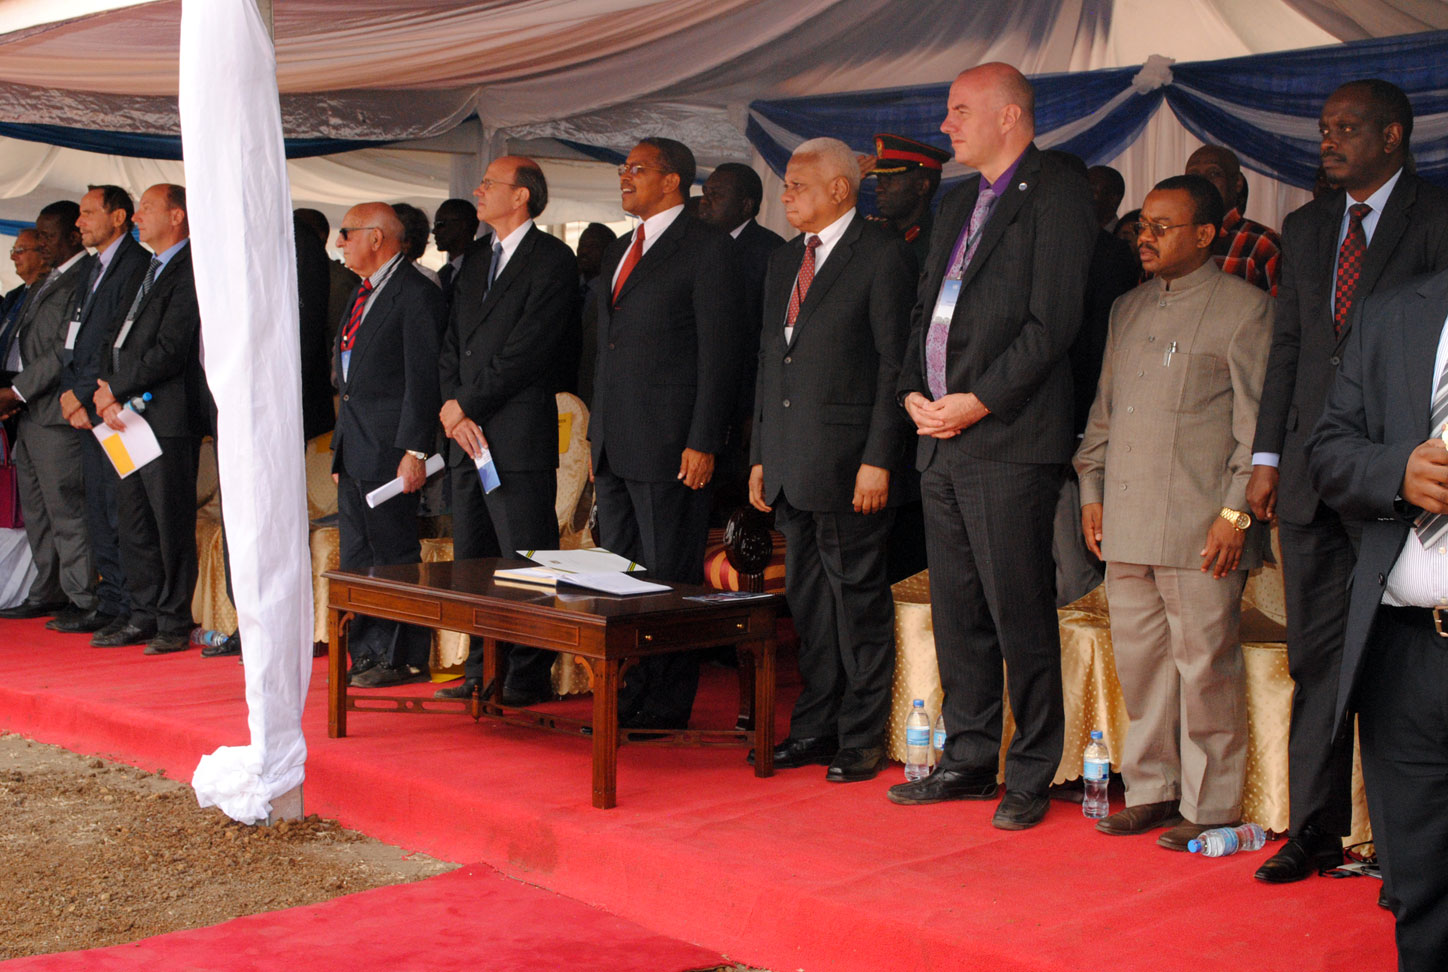 H.E. President Kikwete of Tanzania together with high-level dignitaries standing for the national anthem.